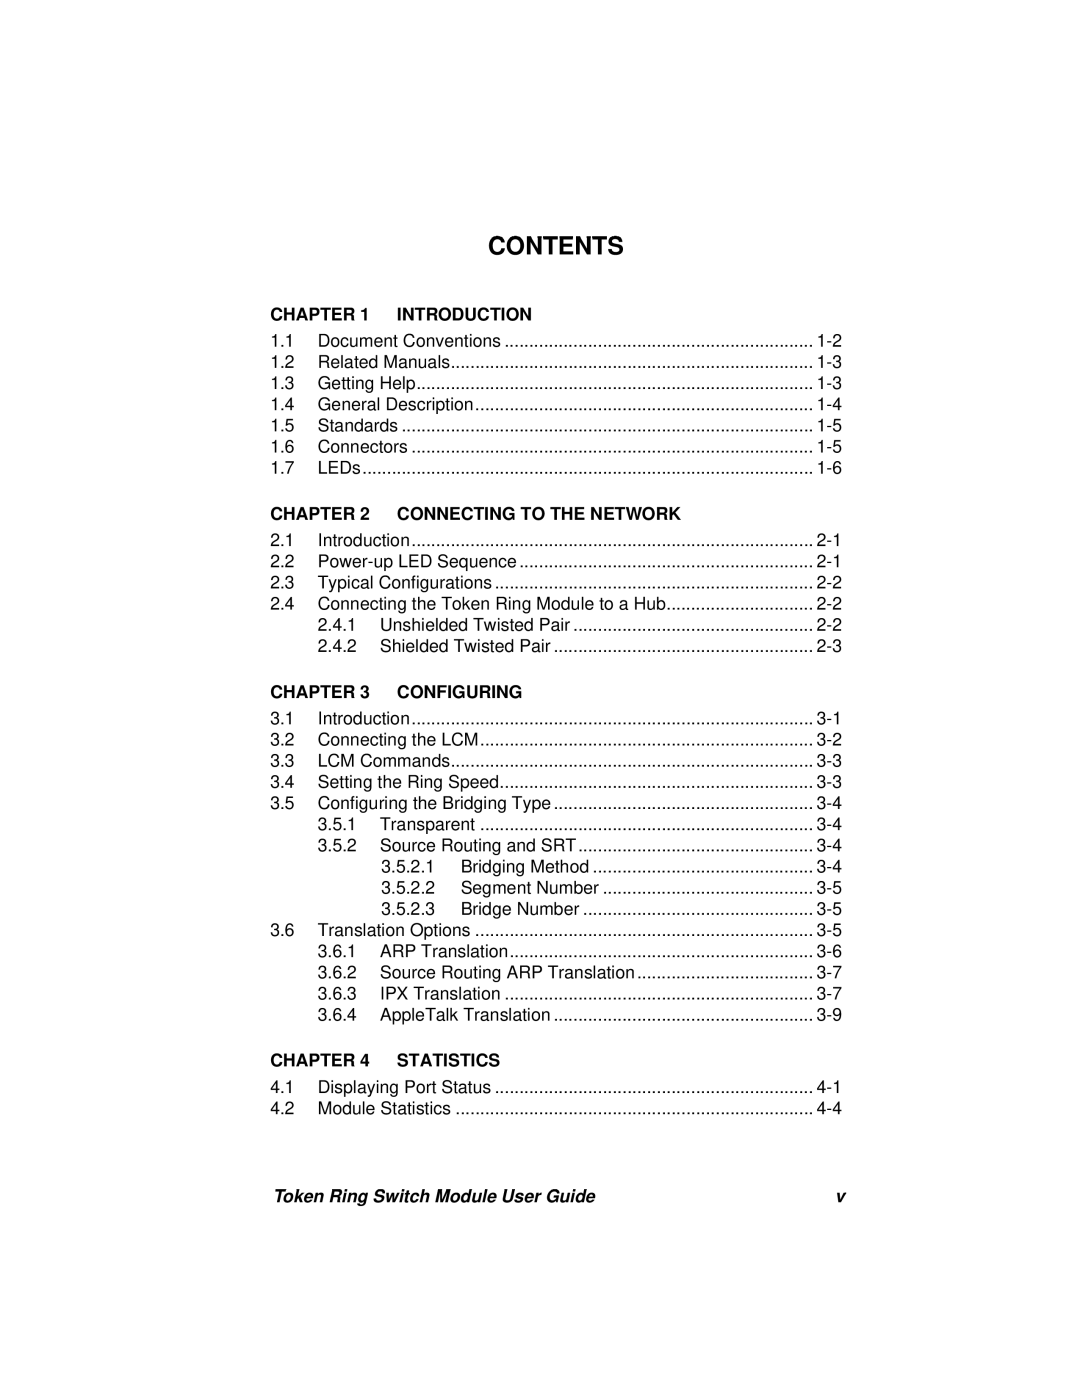 Cabletron Systems 3T02-04 manual Contents, Chapter, Introduction, Connecting To The Network, Configuring, Statistics 